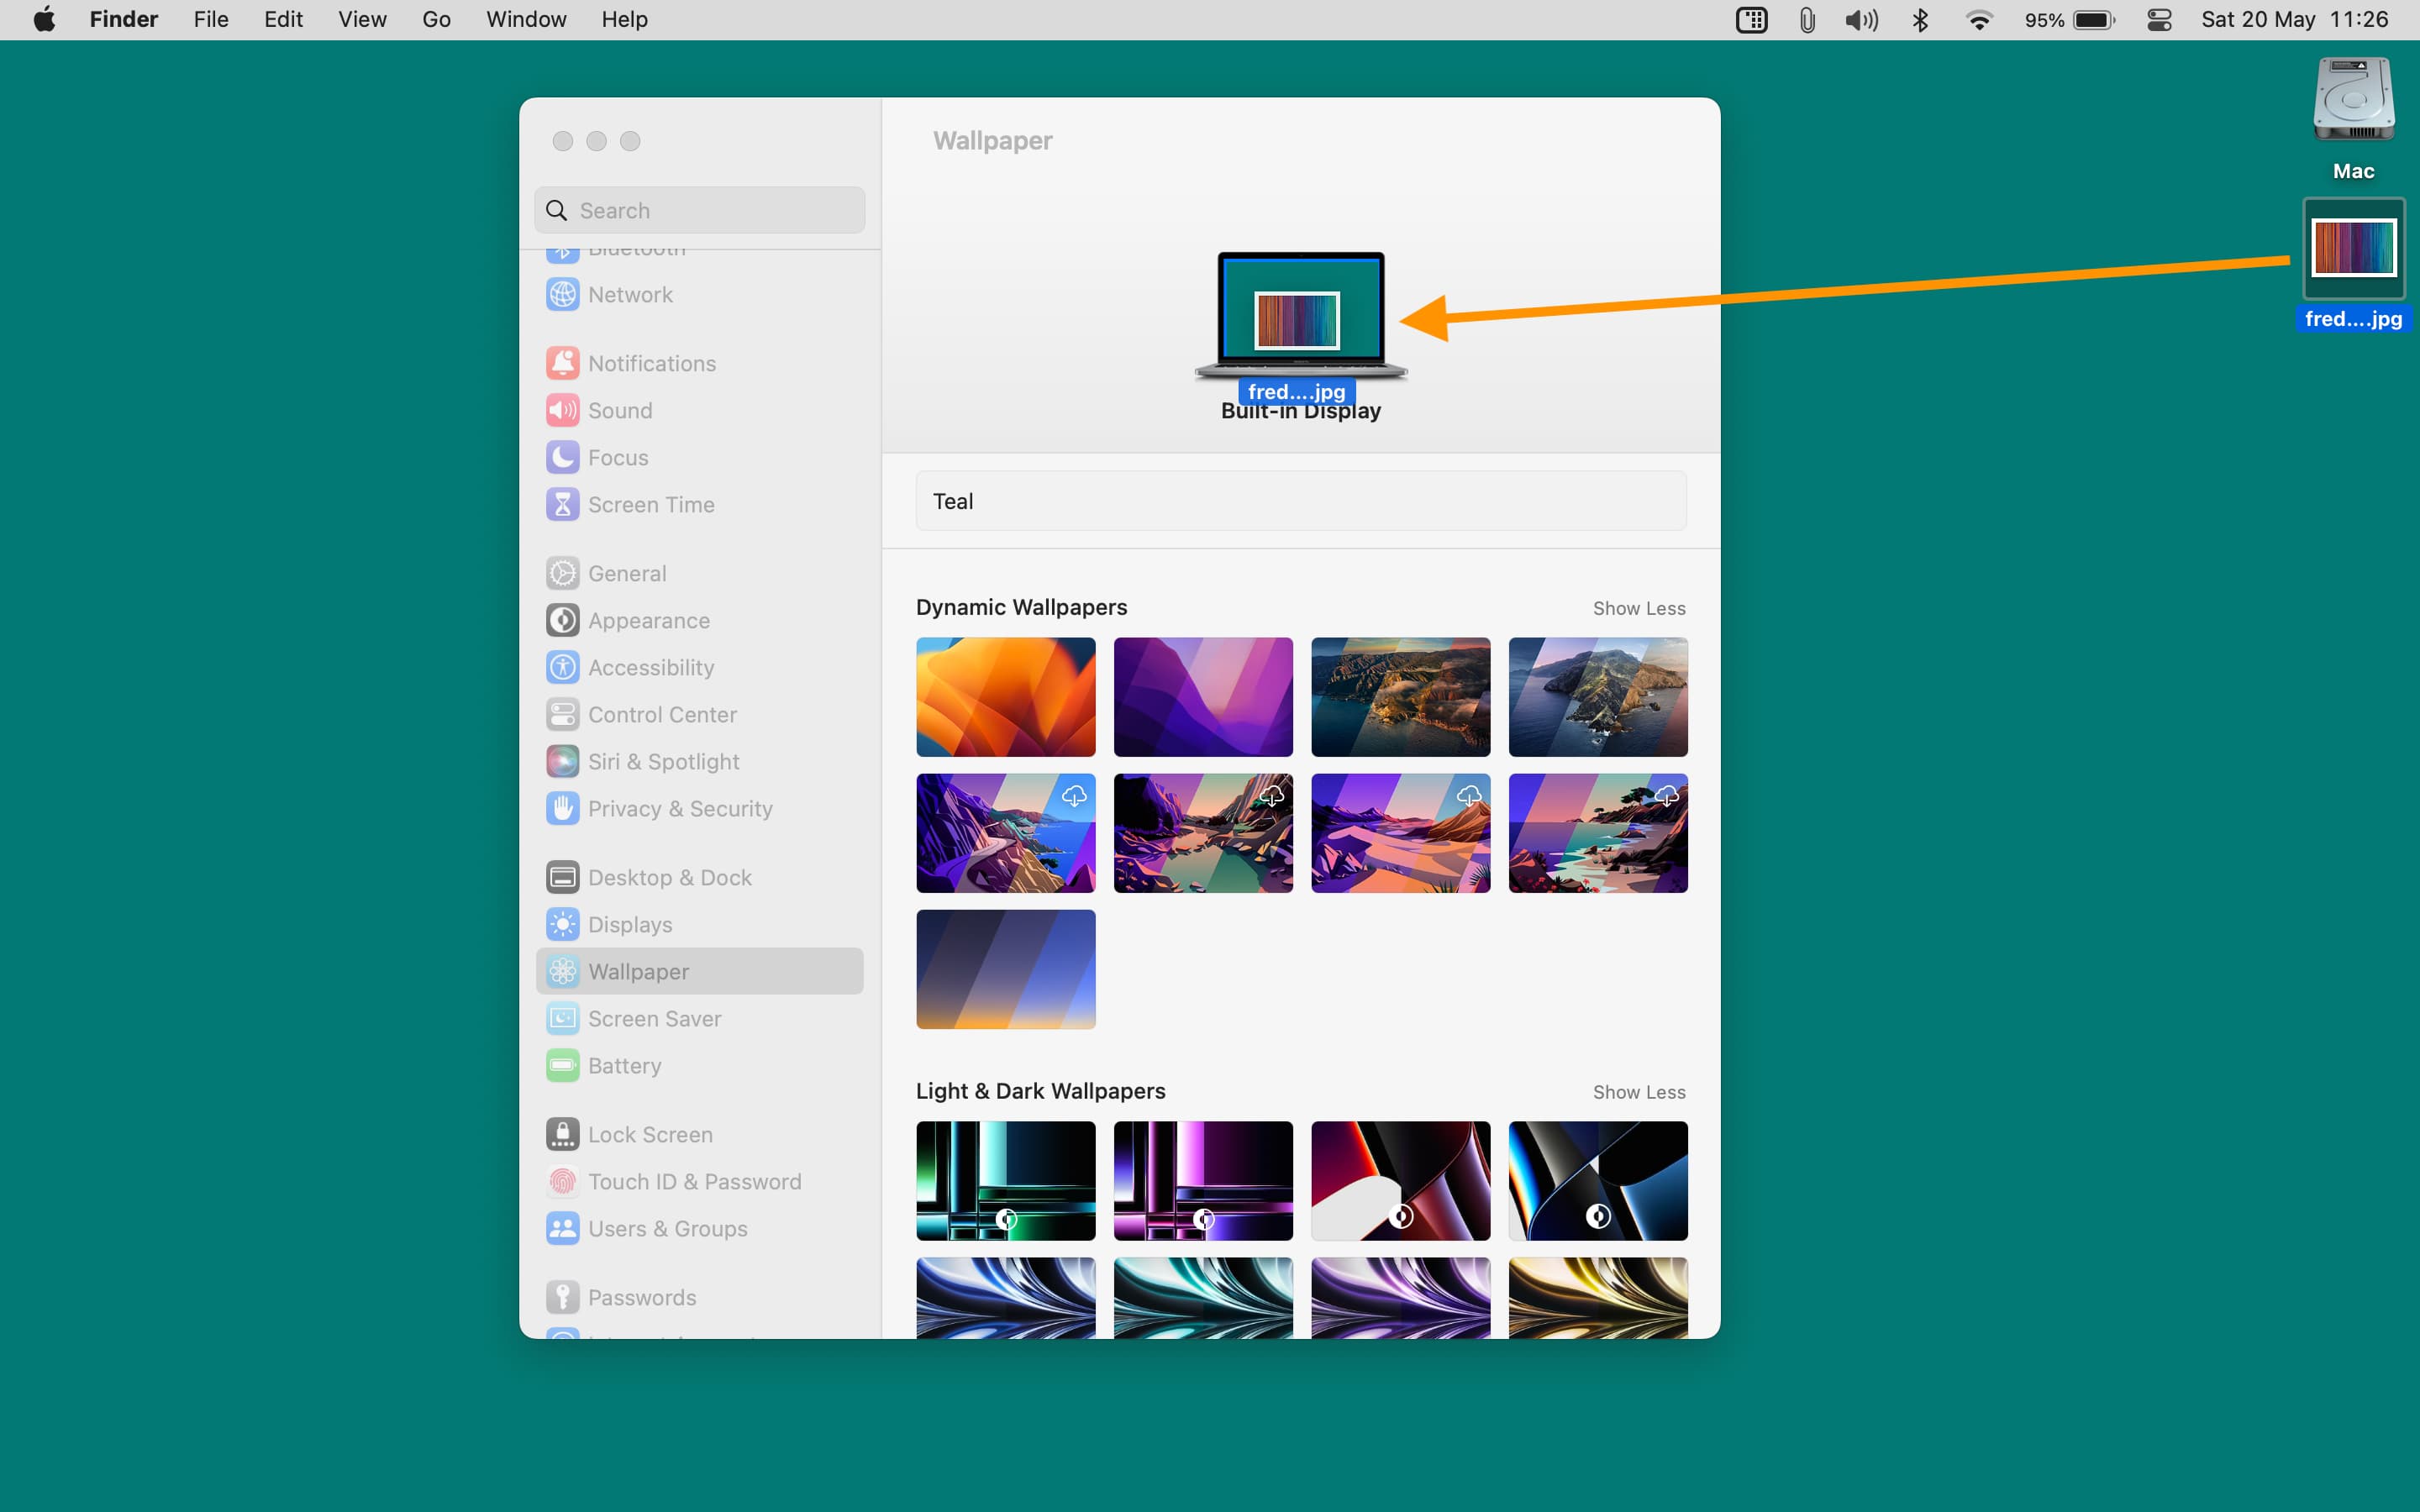 Drag and drop an image from Desktop on the current wallpaper thumbnail to set it as the new Mac desktop background